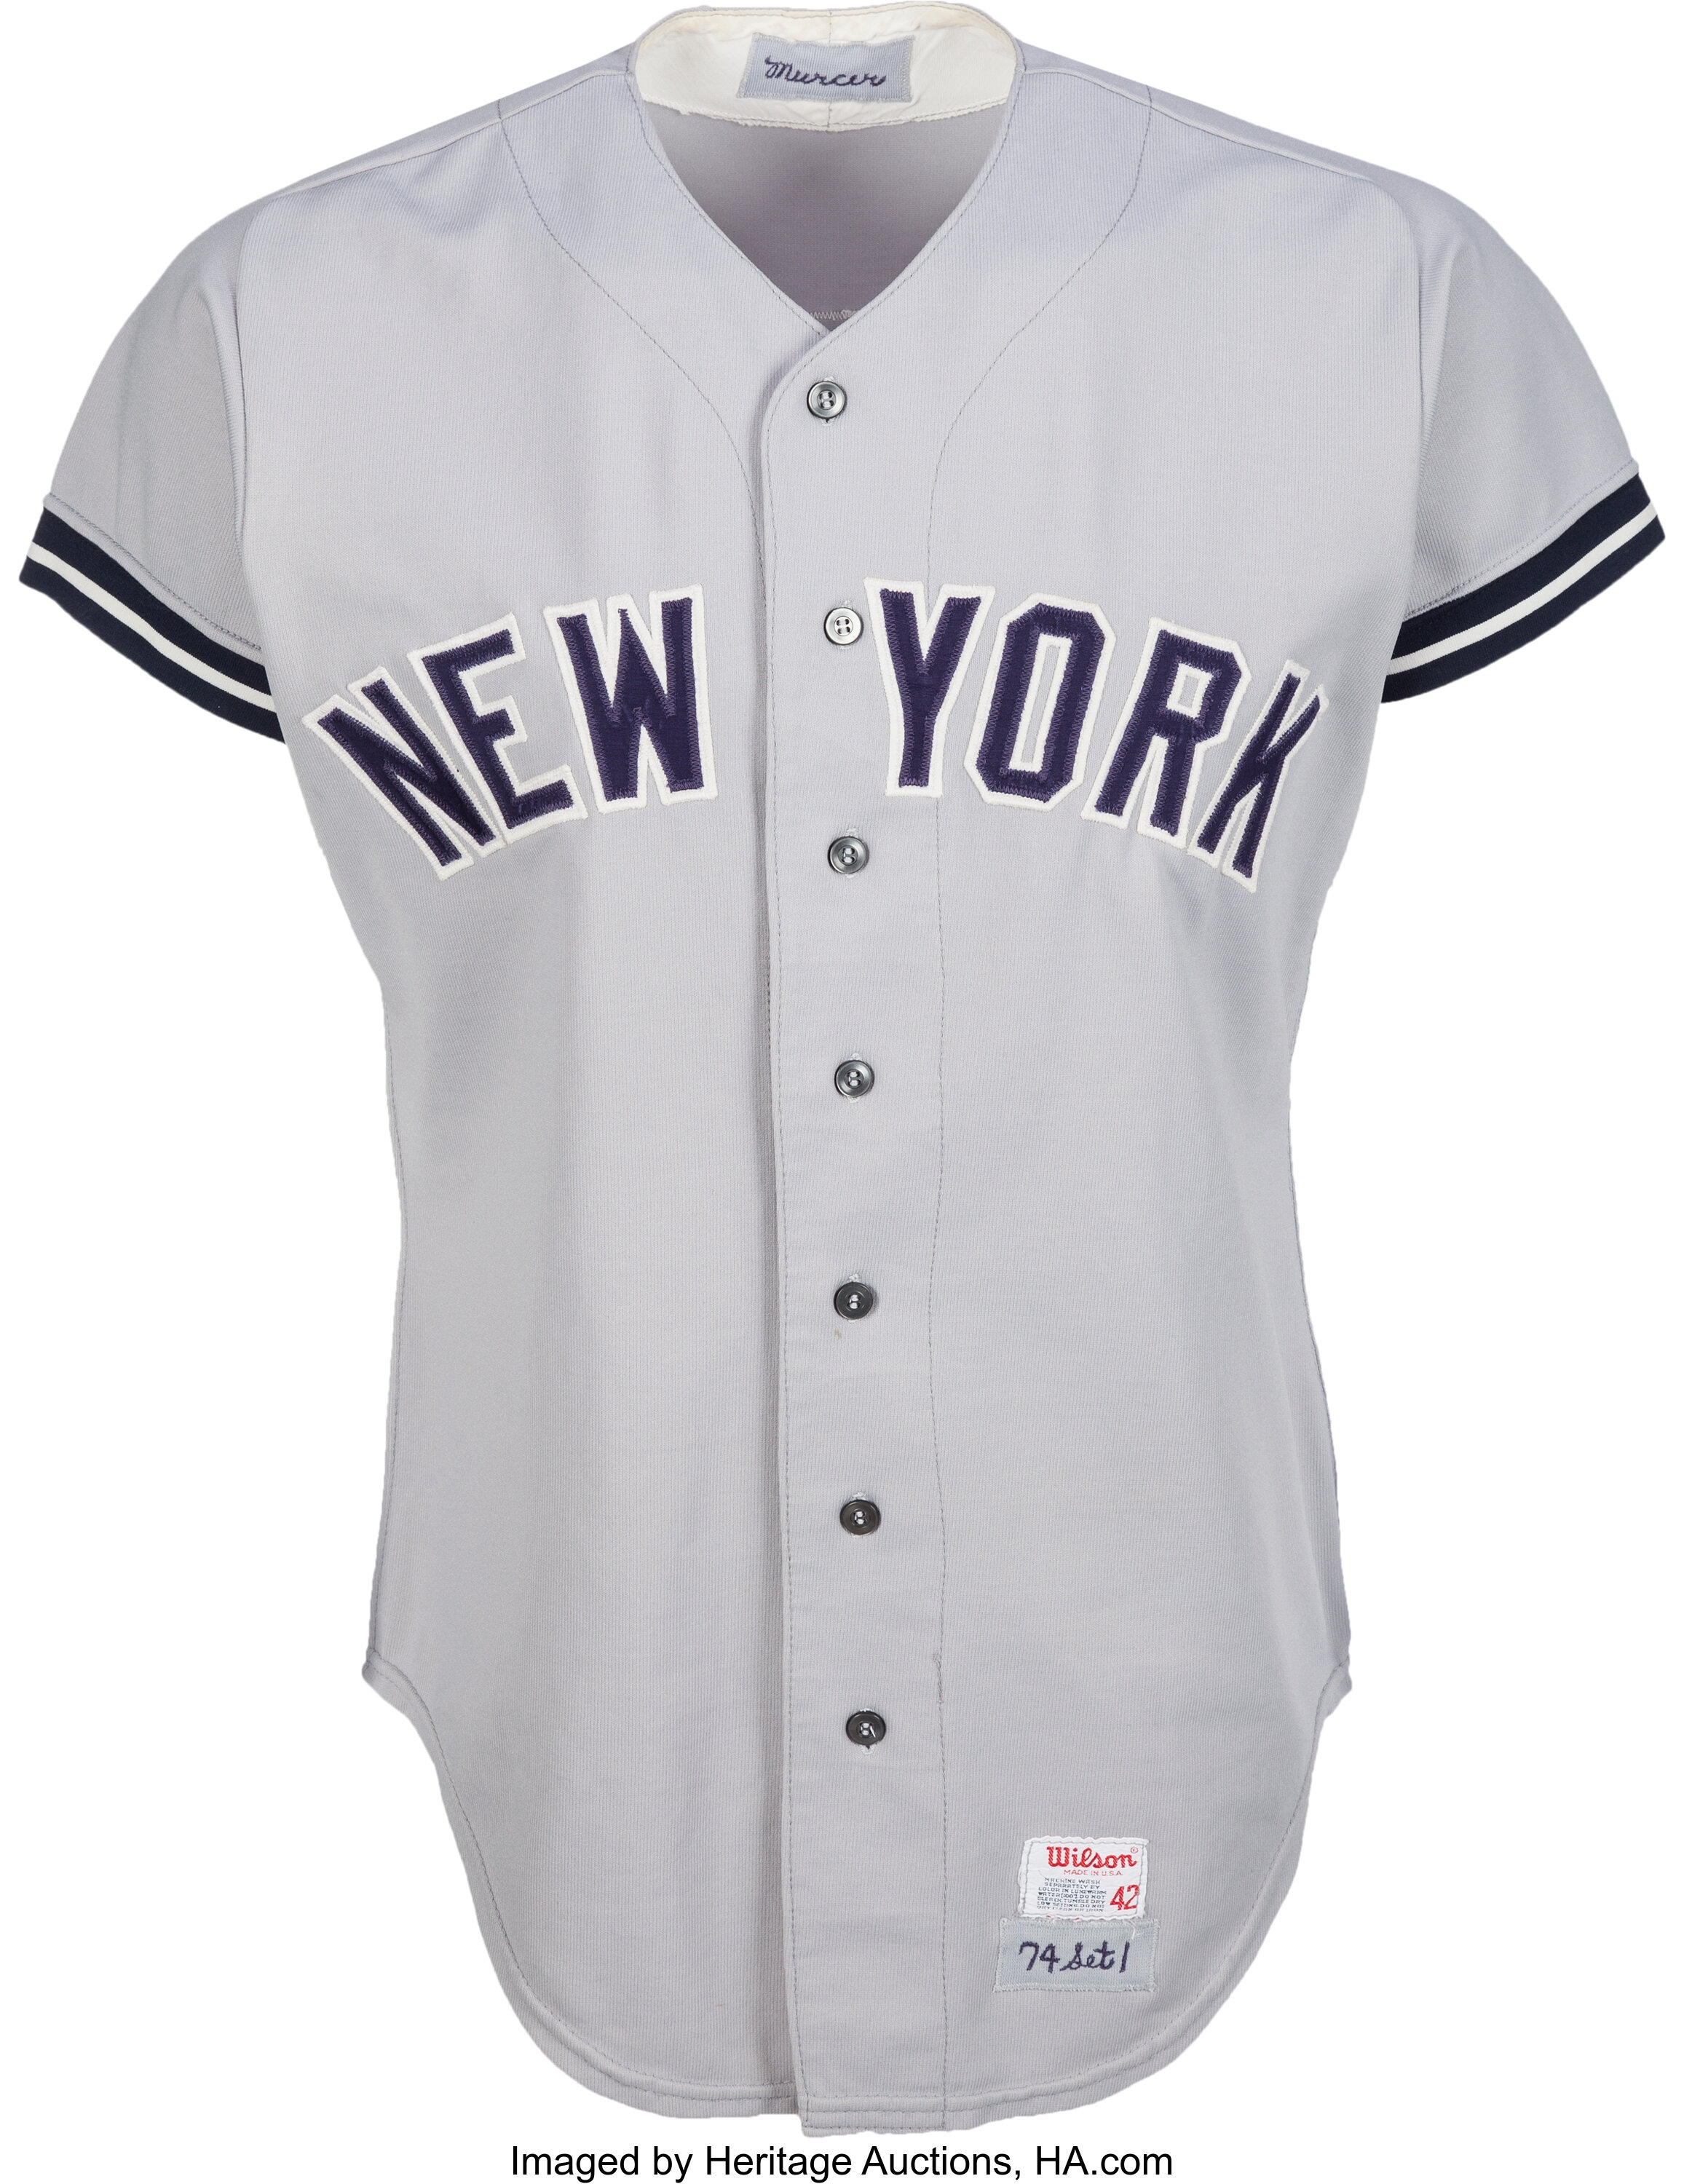 1974 Bobby Murcer Game Worn New York Yankees Jersey from The Bobby